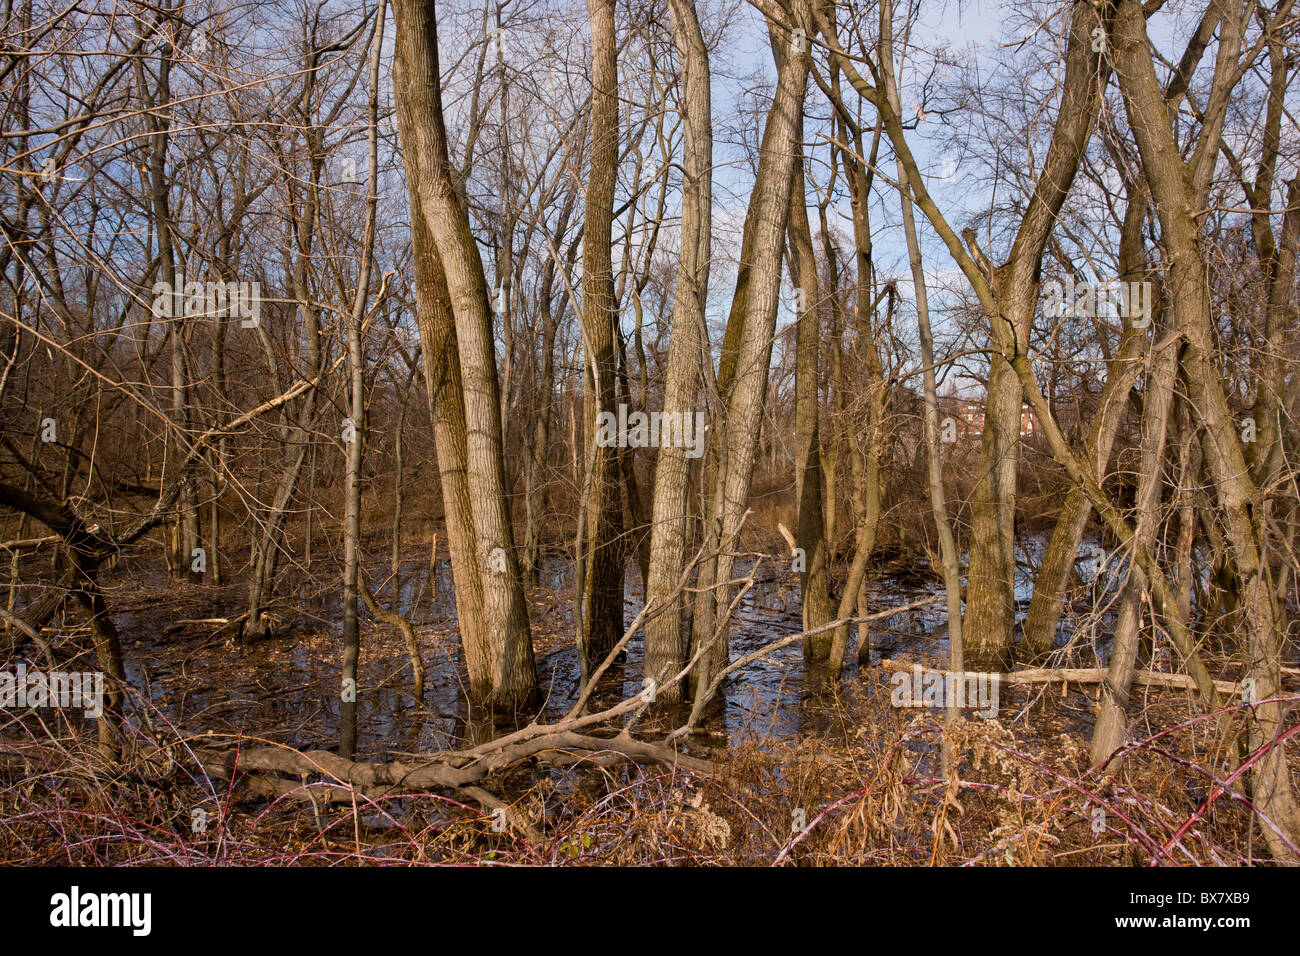 Valley woodland of Eastern Cottonwood (poplar) trees along the Mohawk River, near Albany, New York State. Stock Photo